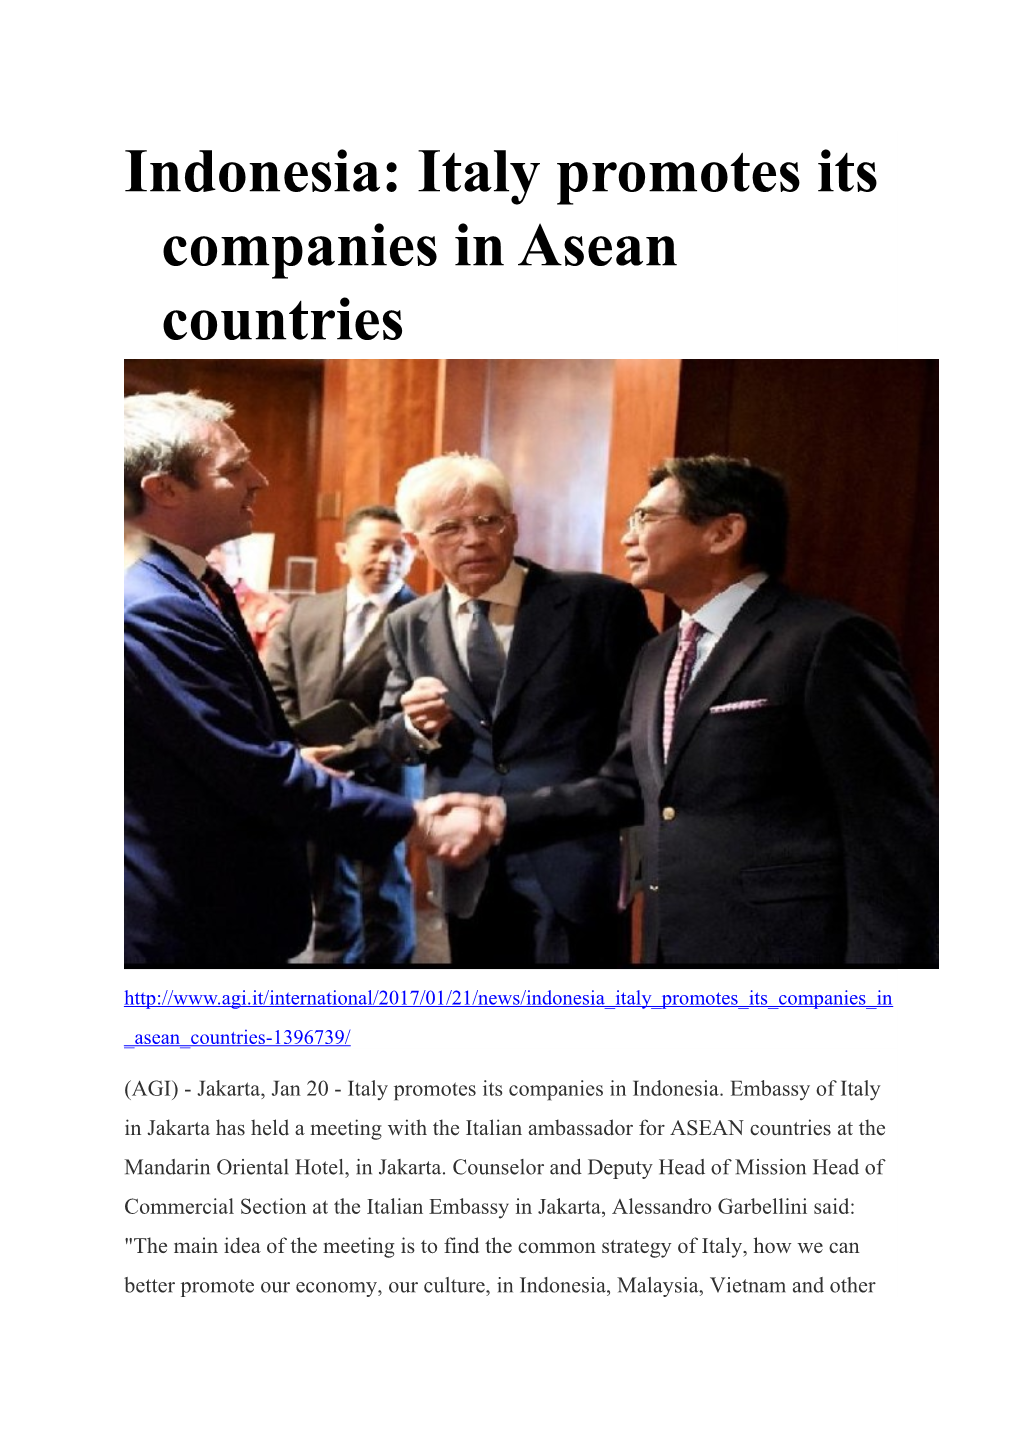 Indonesia: Italy Promotes Its Companies in Asean Countries